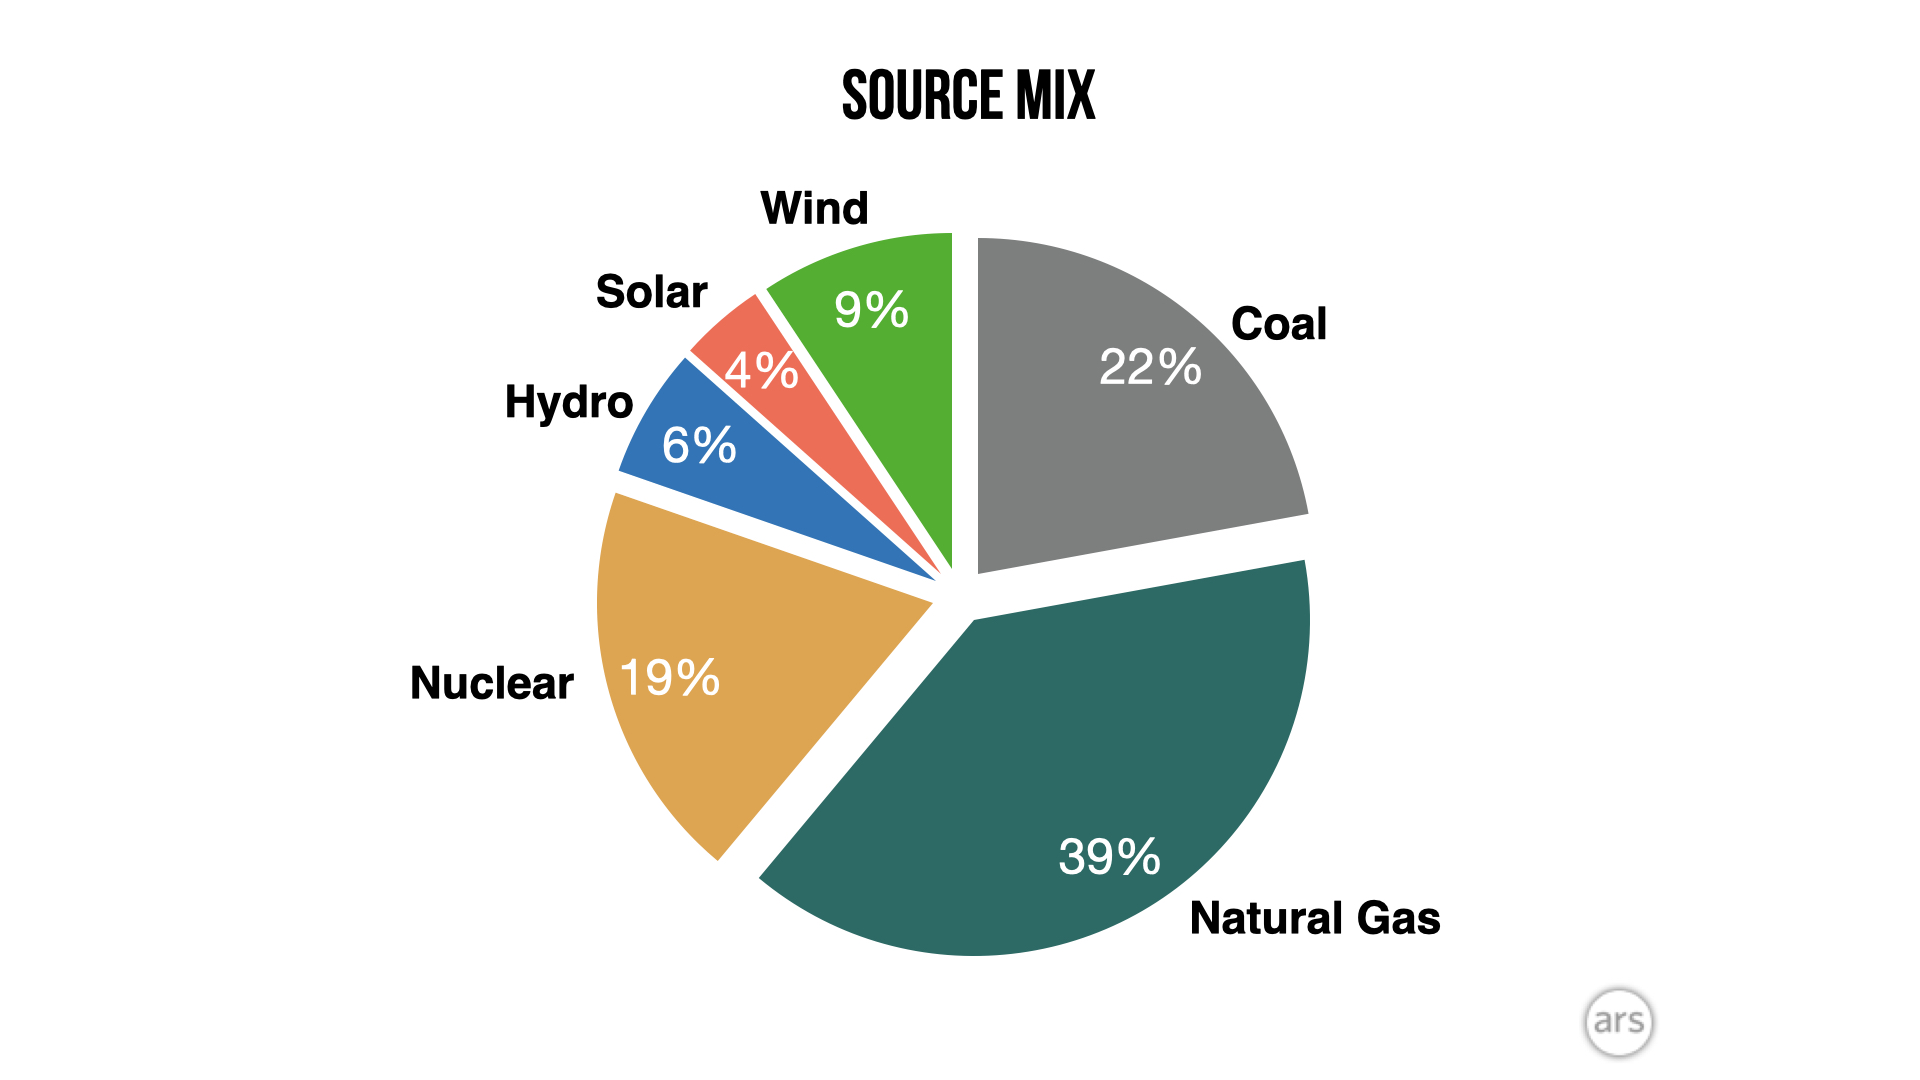 In 2021, the three renewable sources caught up with nuclear and continued closing in on coal as a percentage of total generation.